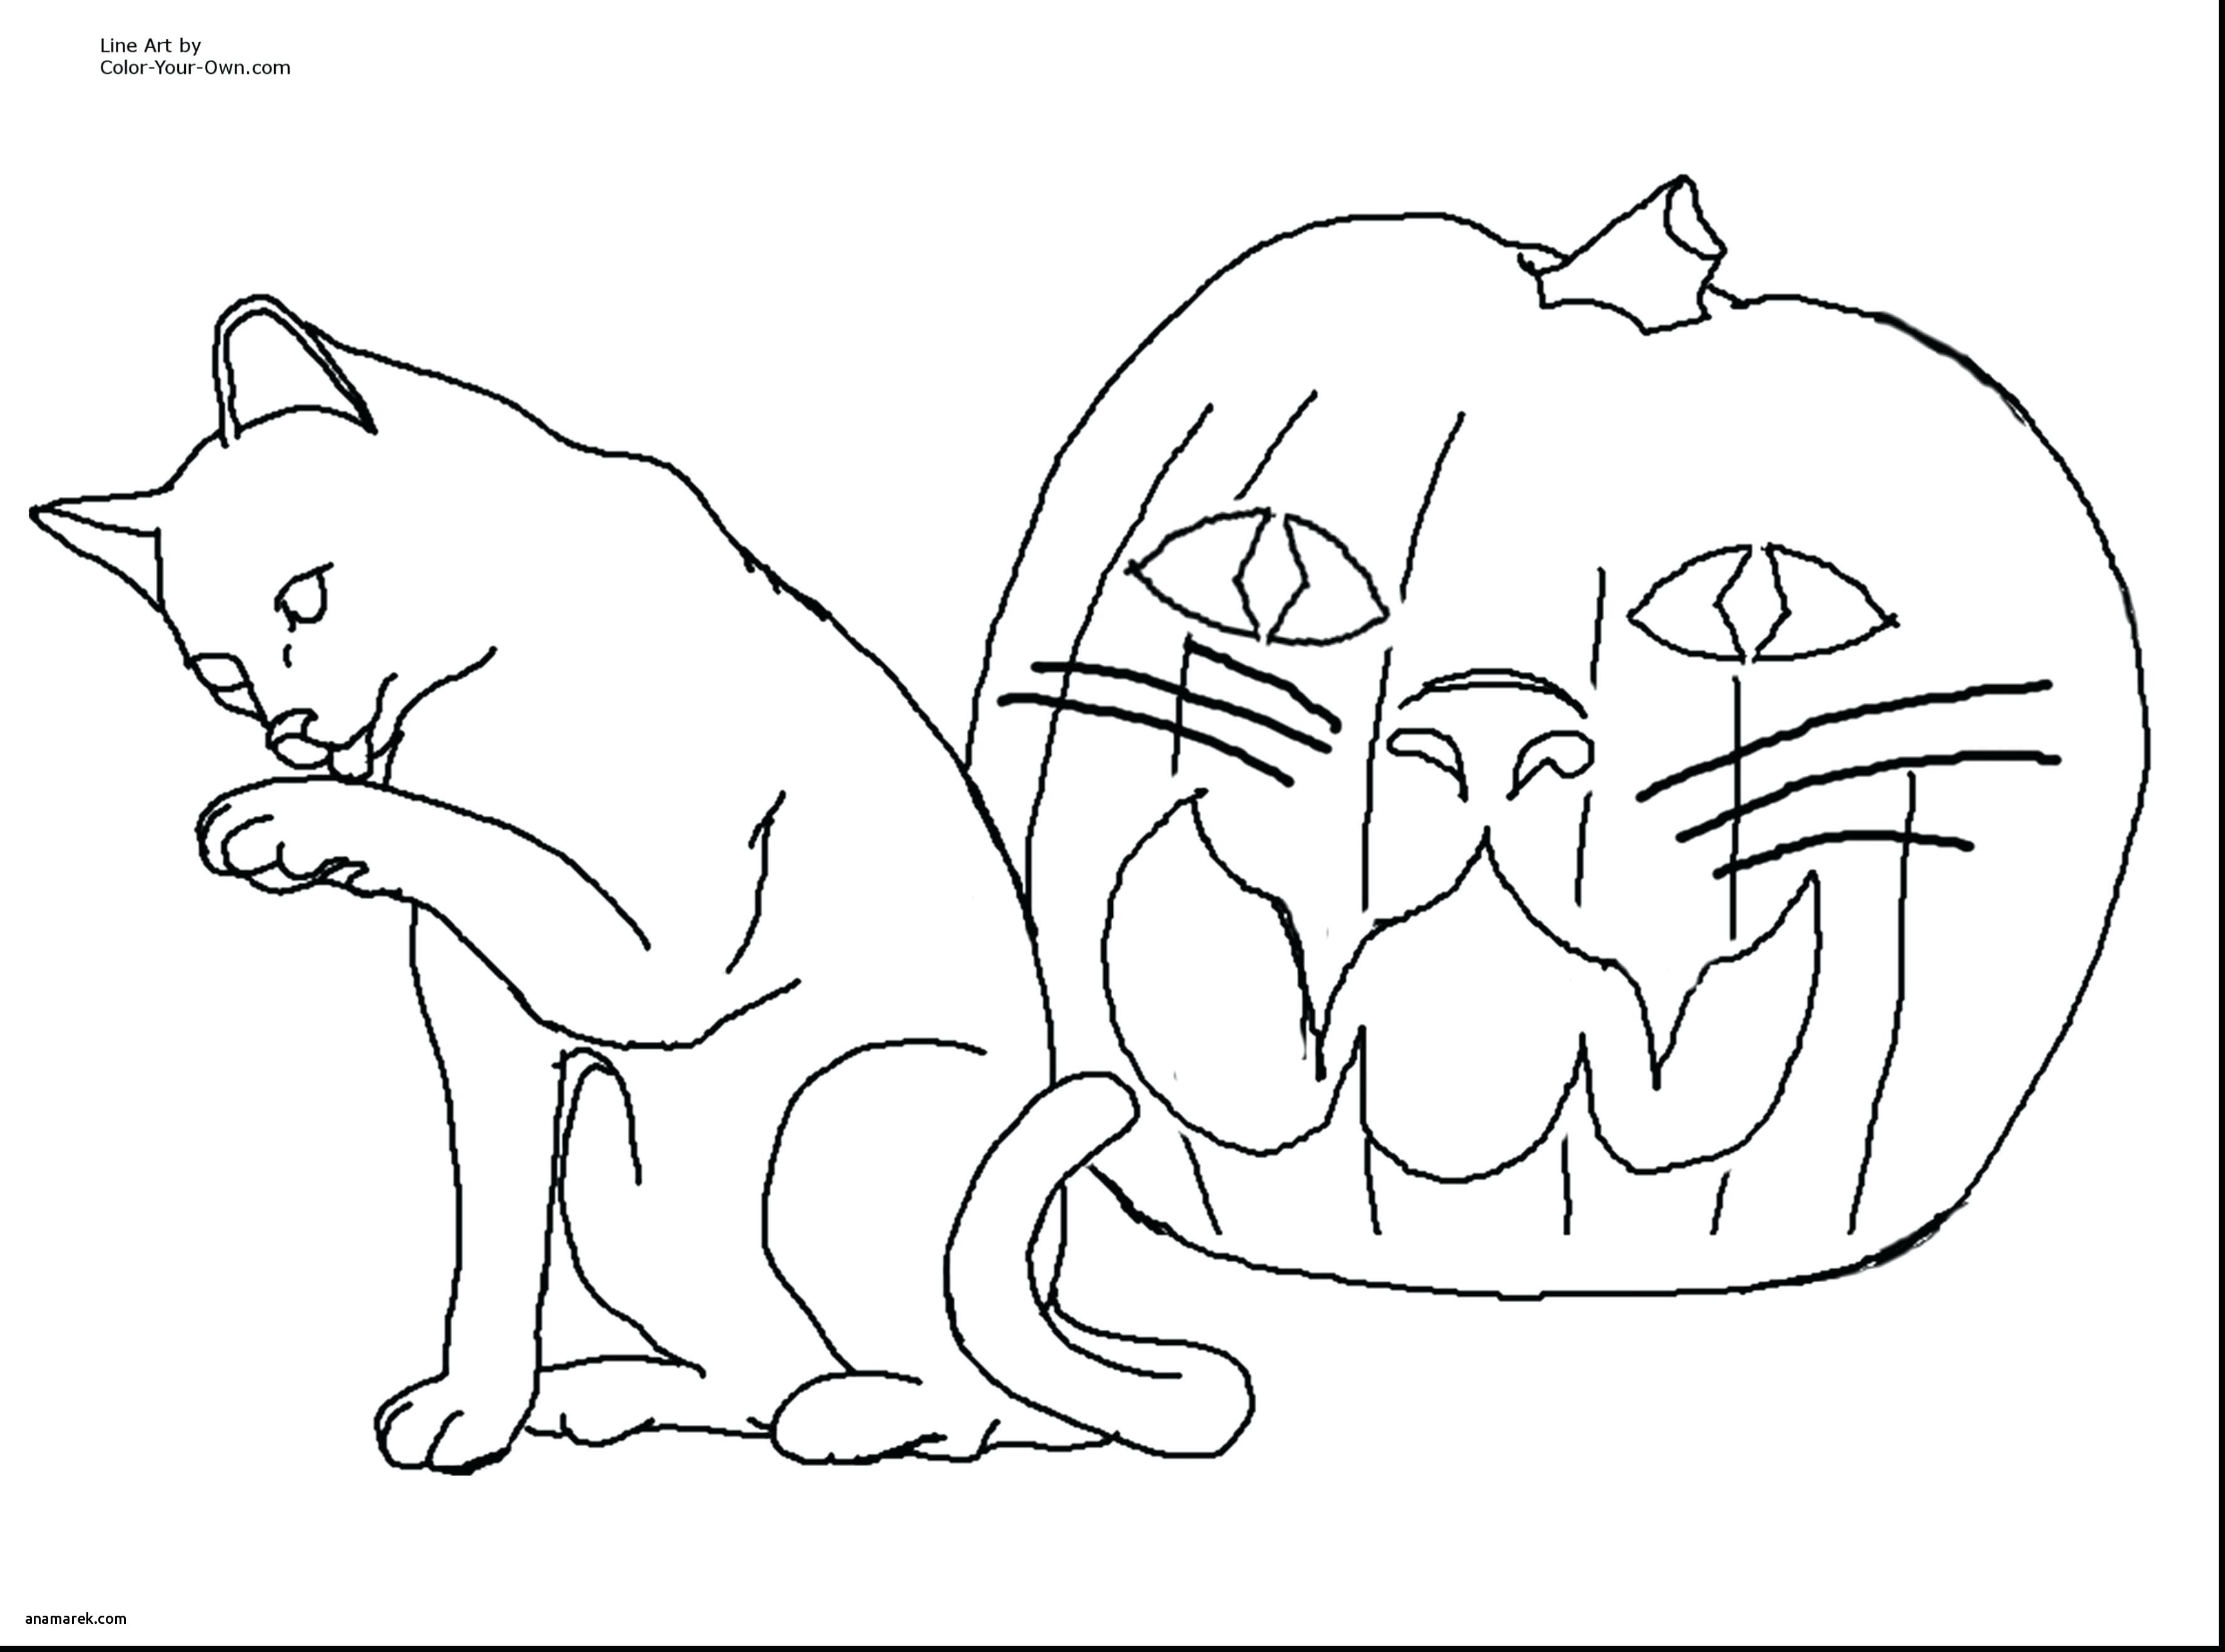 Dog and Cat Coloring Pages Lovely Dog and Cat Coloring Pages New Cool Od Dog Coloring